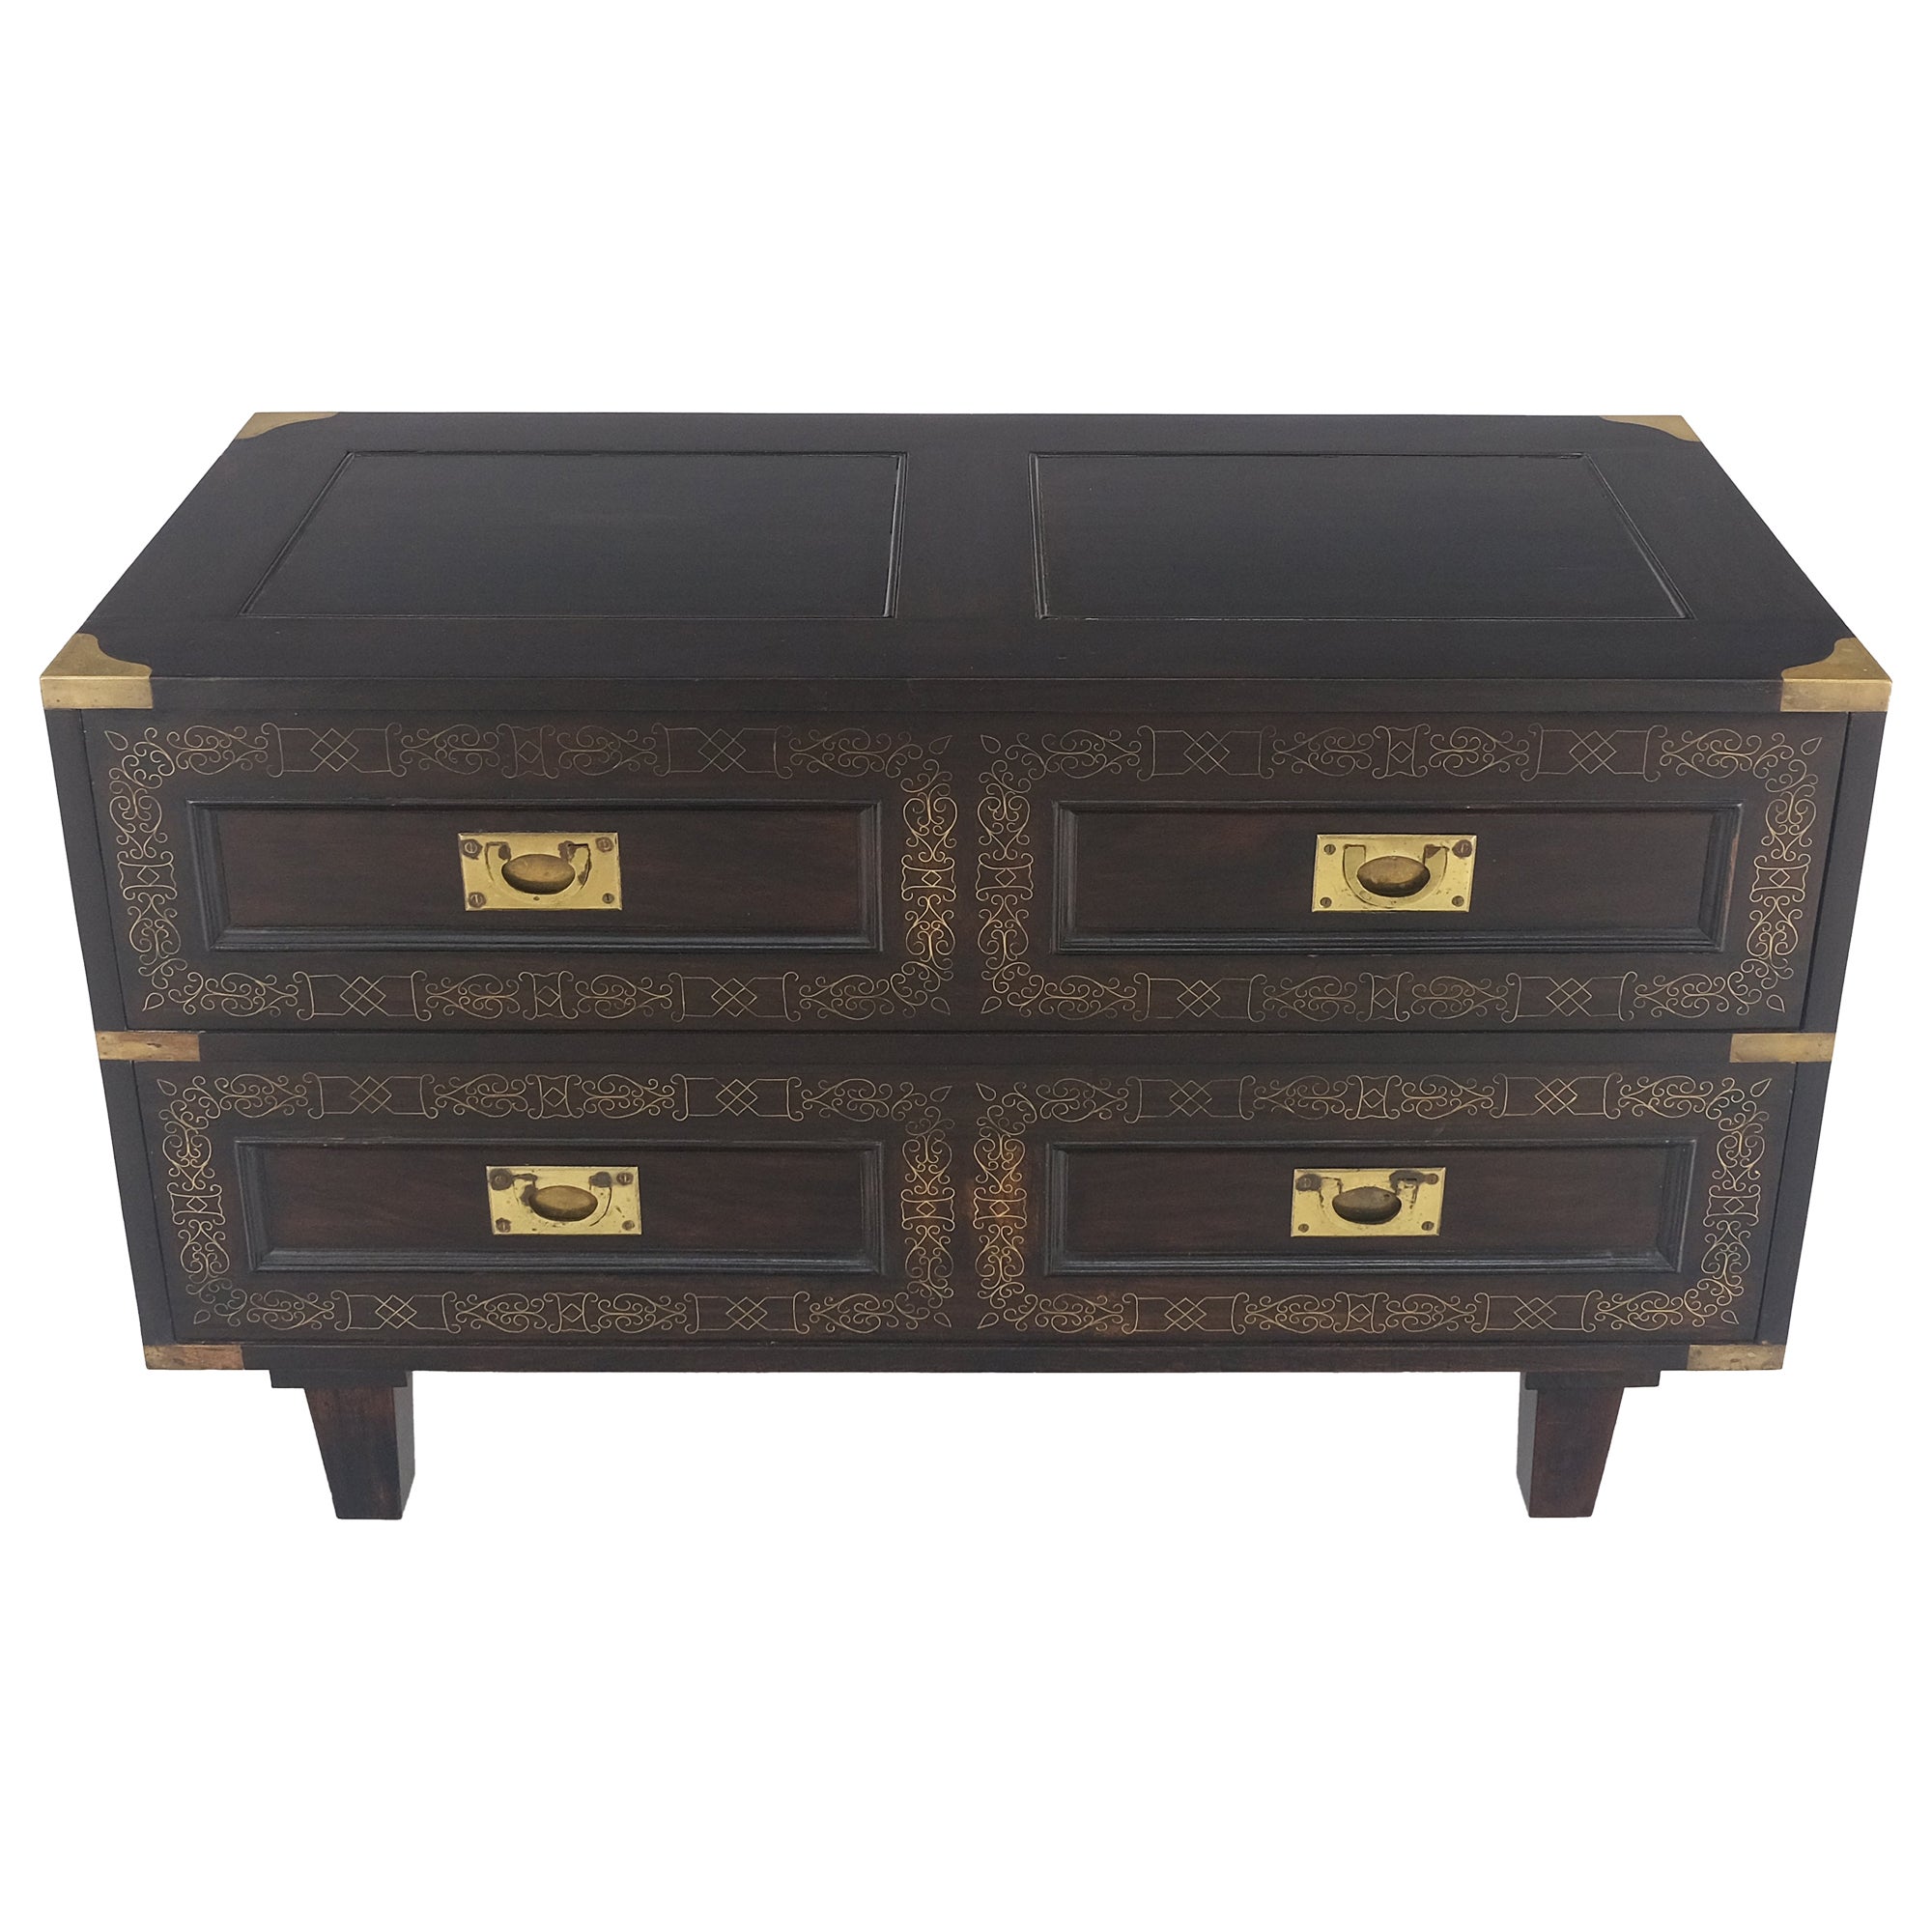 Campaign Style Ebonized Mahogany Brass Inlay Two Drawers Small Dresser Chest 